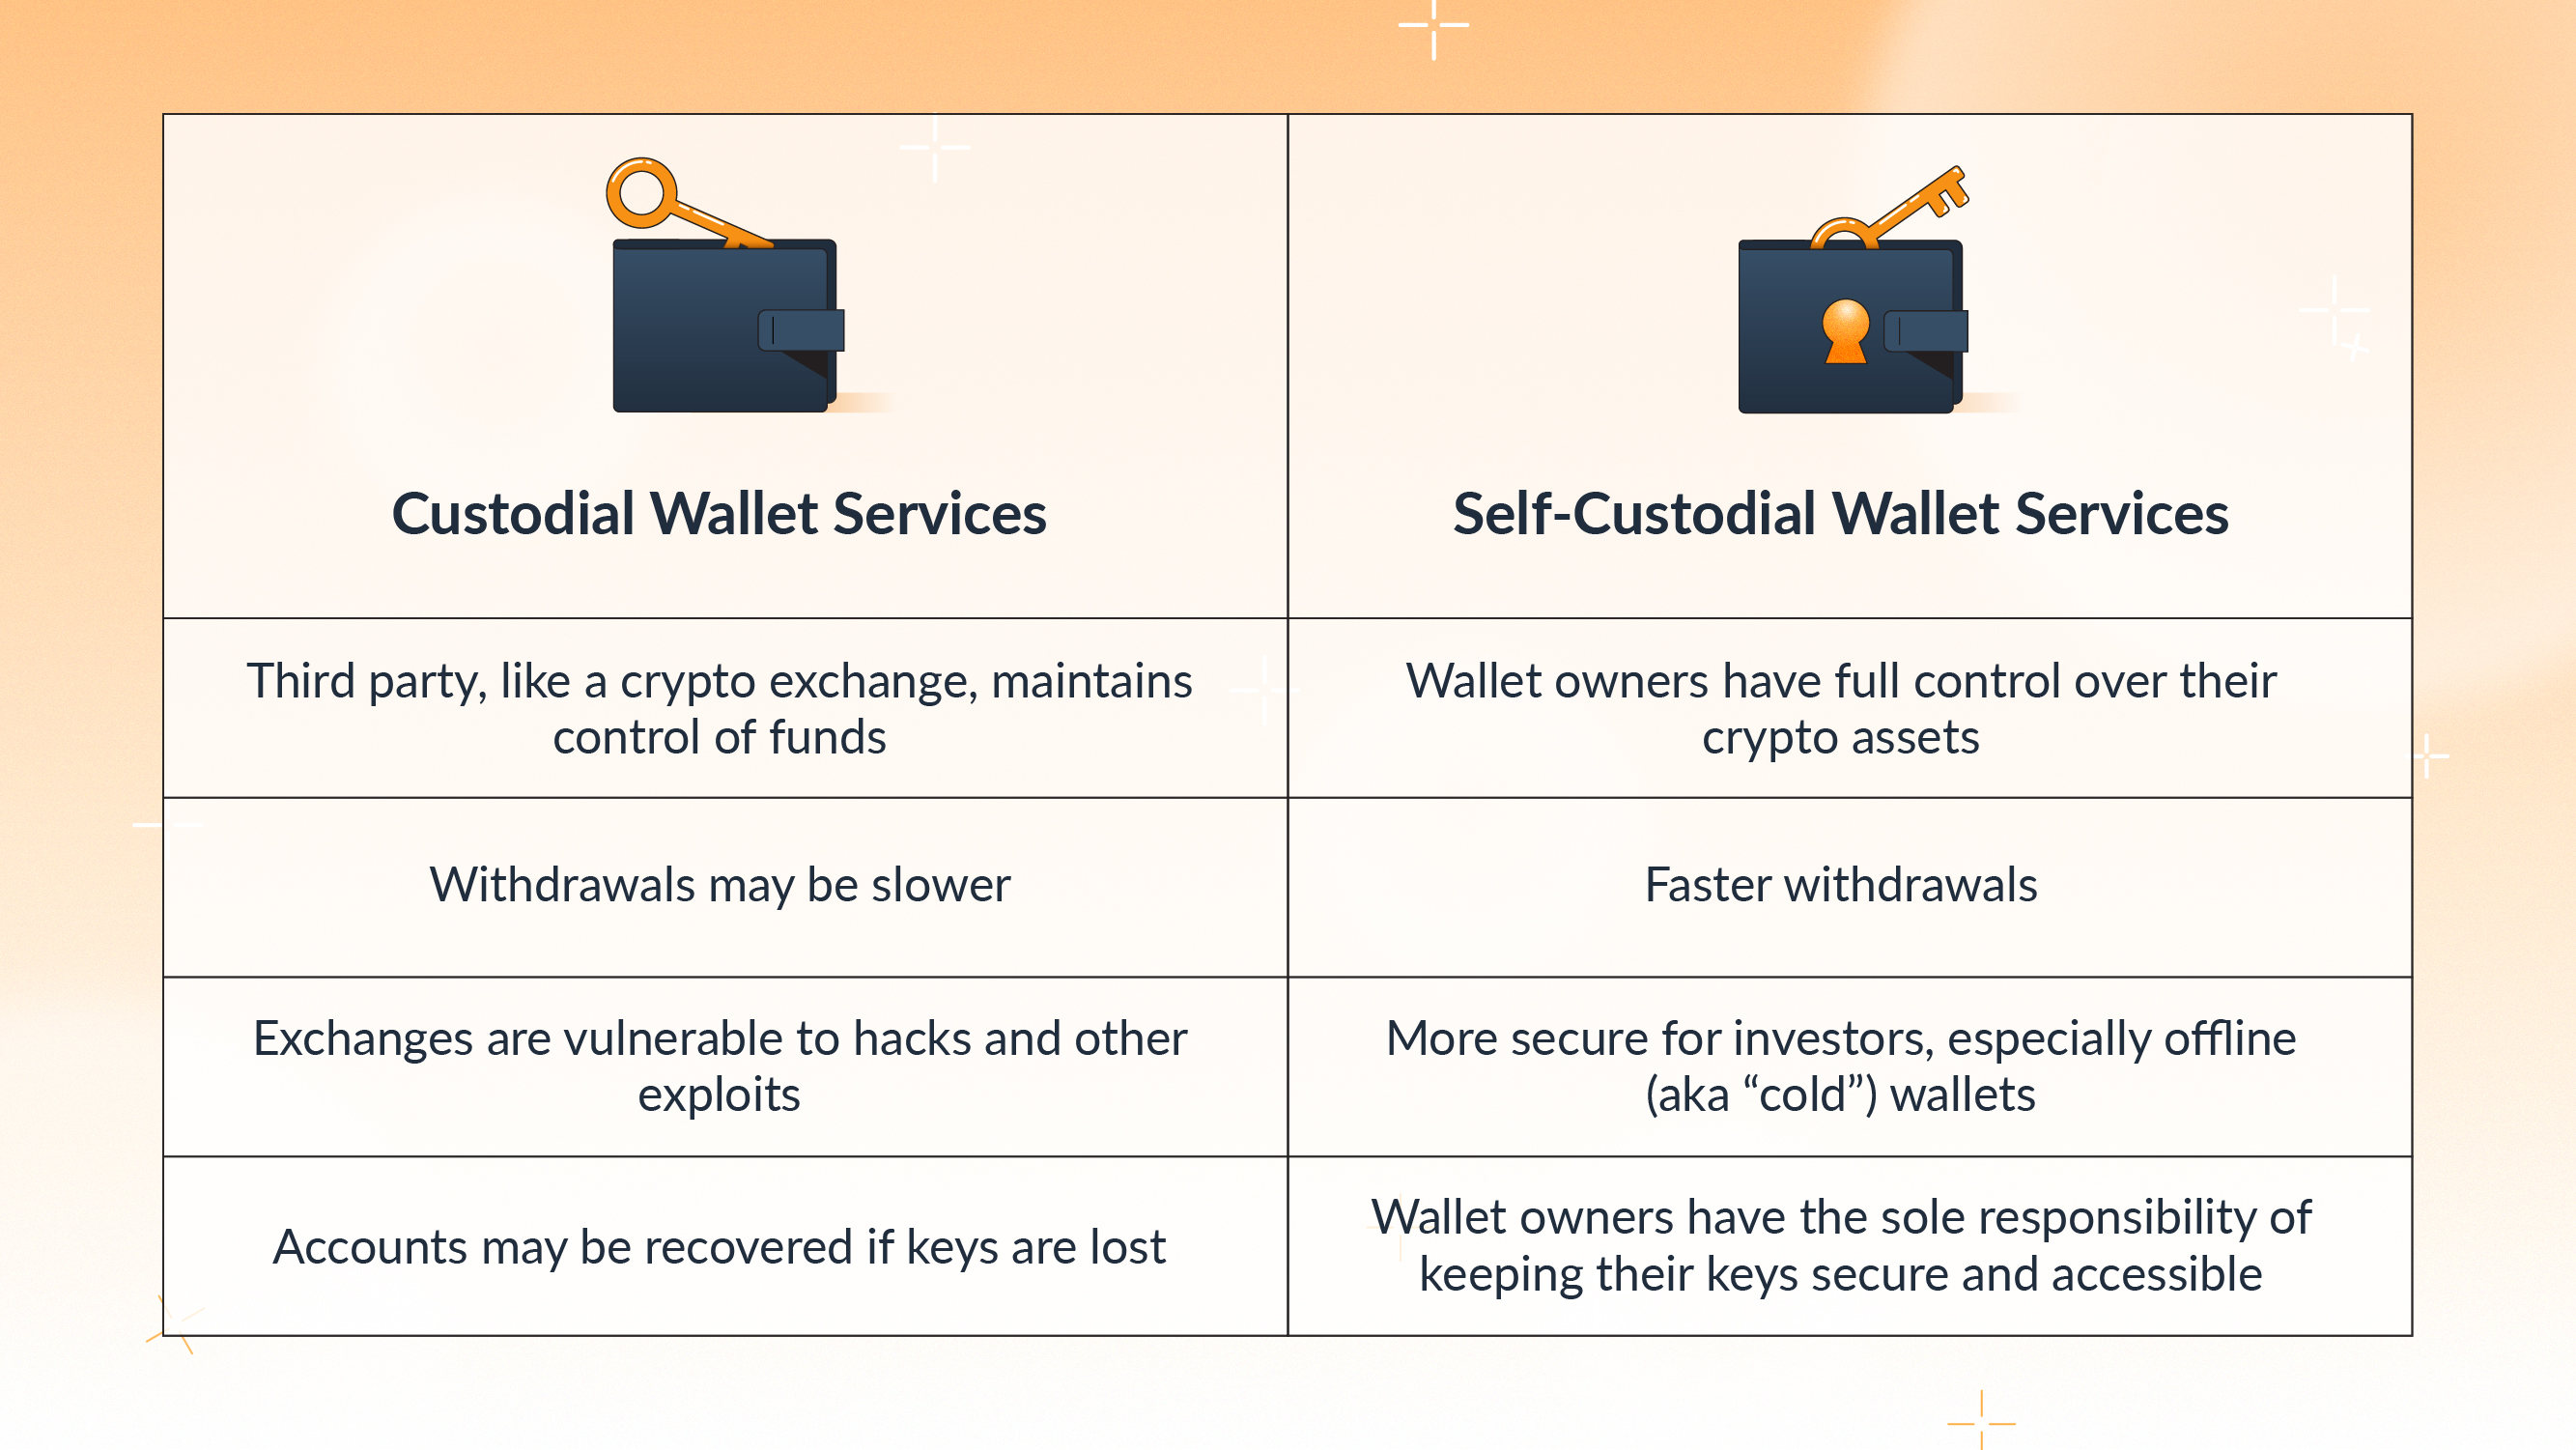 Table describing advantages and disadvantages for custodial wallet services and self-custodial wallet services, highlighted with orange and blue iconography.